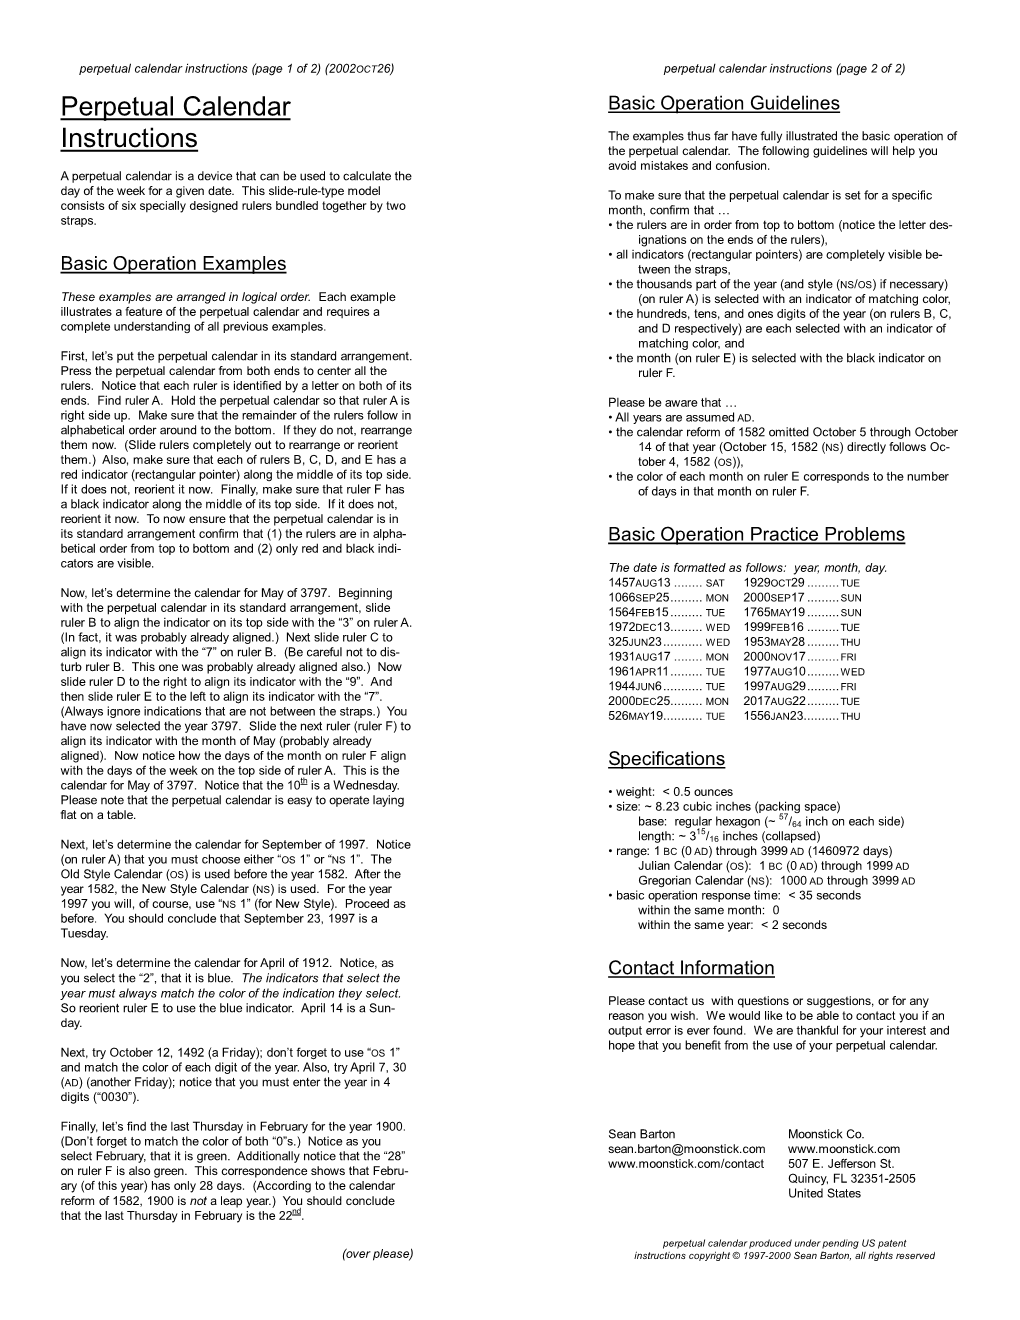 Perpetual Calendar Instructions (Page 1 of 2) (2002OCT26) Perpetual Calendar Instructions (Page 2 of 2) Perpetual Calendar Basic Operation Guidelines